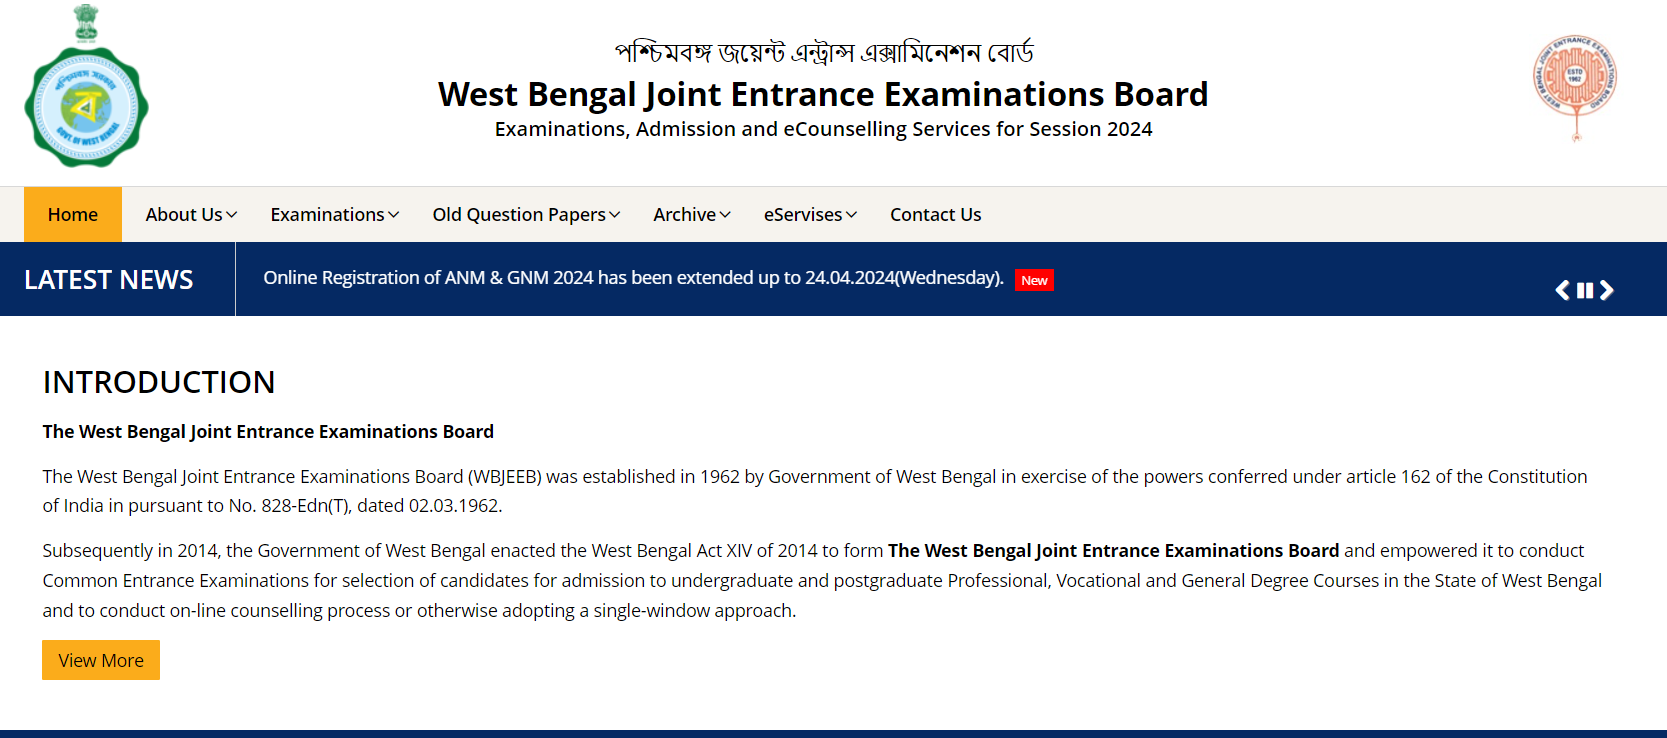 Check For The WBJEE Result 2024 Downlink Link @wbjeeb.nic.in